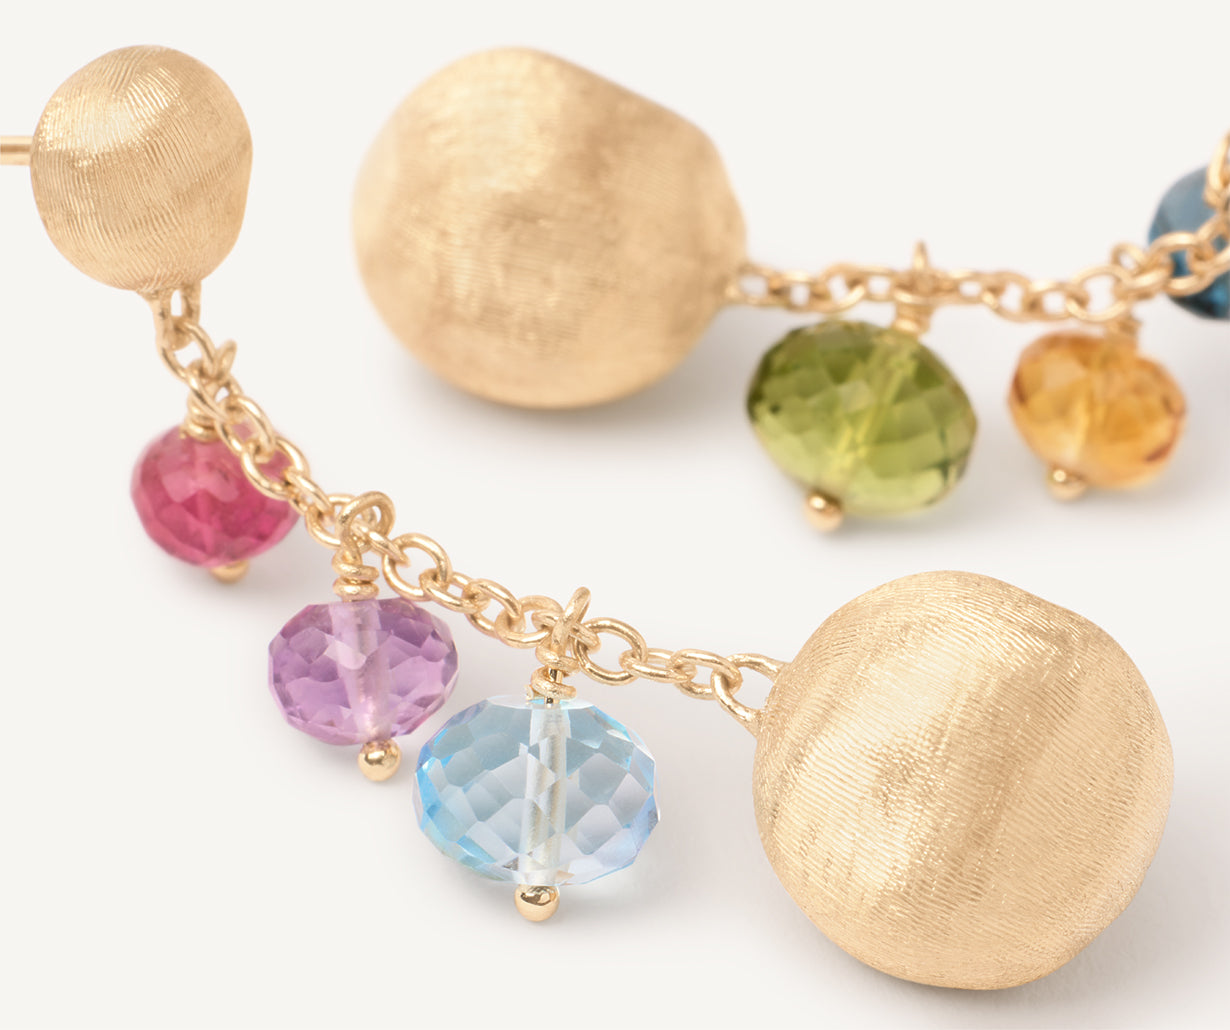 18K YELLOW GOLD MIXED GEMSTONE EARRINGS FROM THE AFRICA GEMSTONE COLLECTION